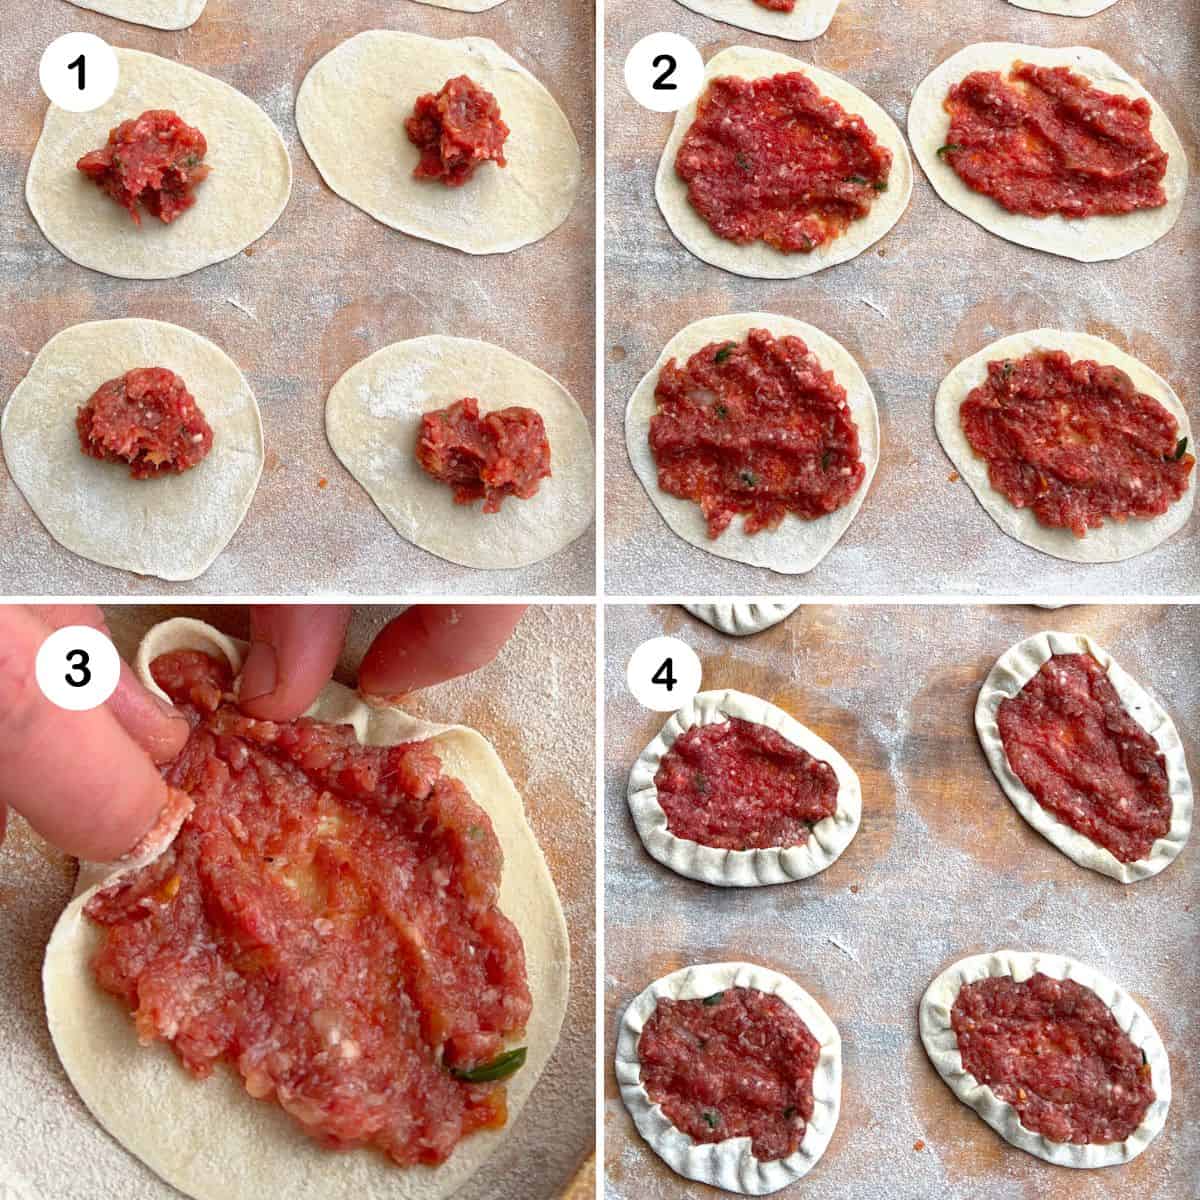 Steps for shaping sfiha pies